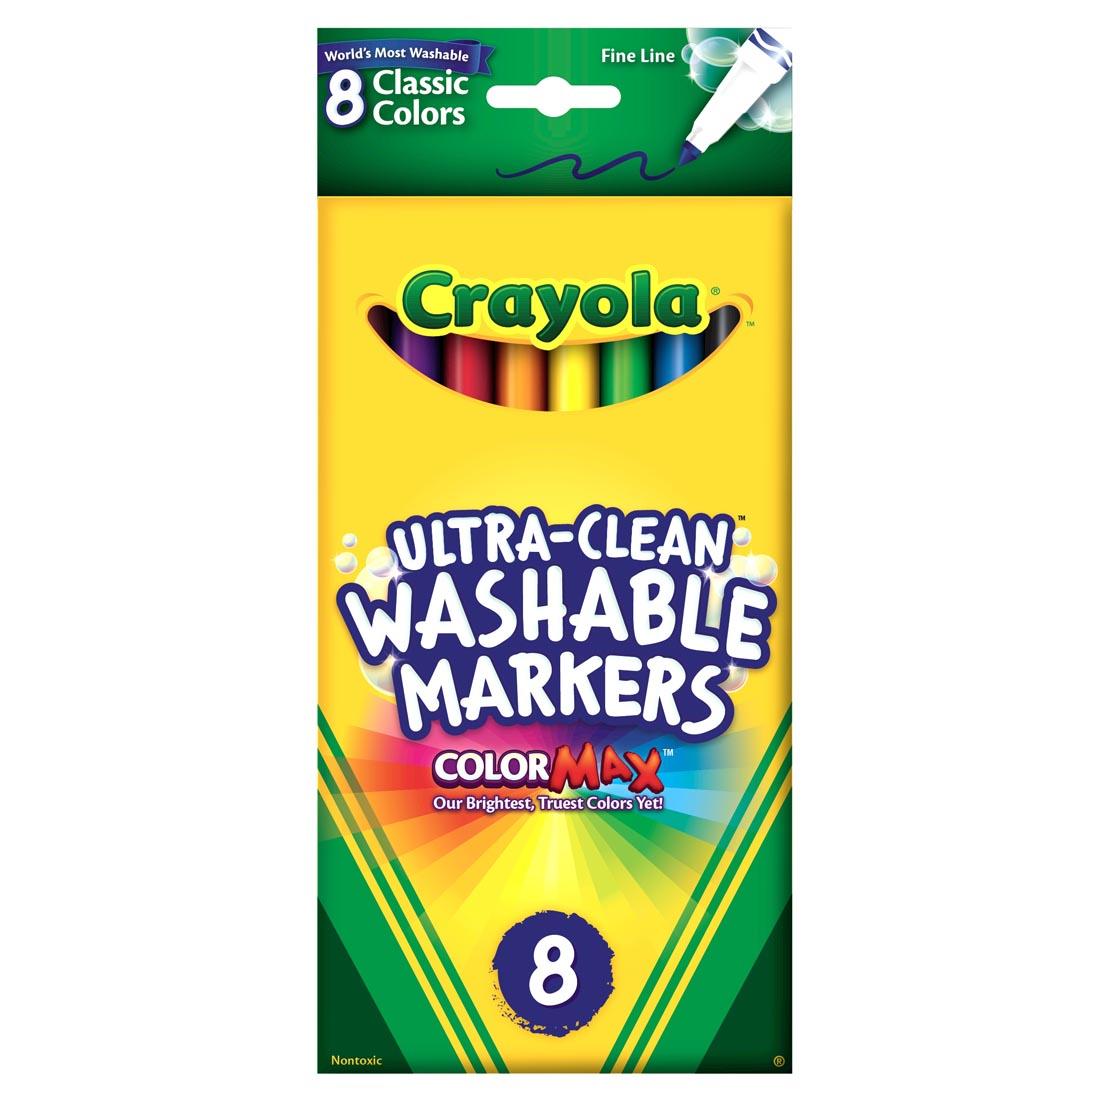 Crayola Ultra-Clean Washable Fine Line Markers 8-Color Set